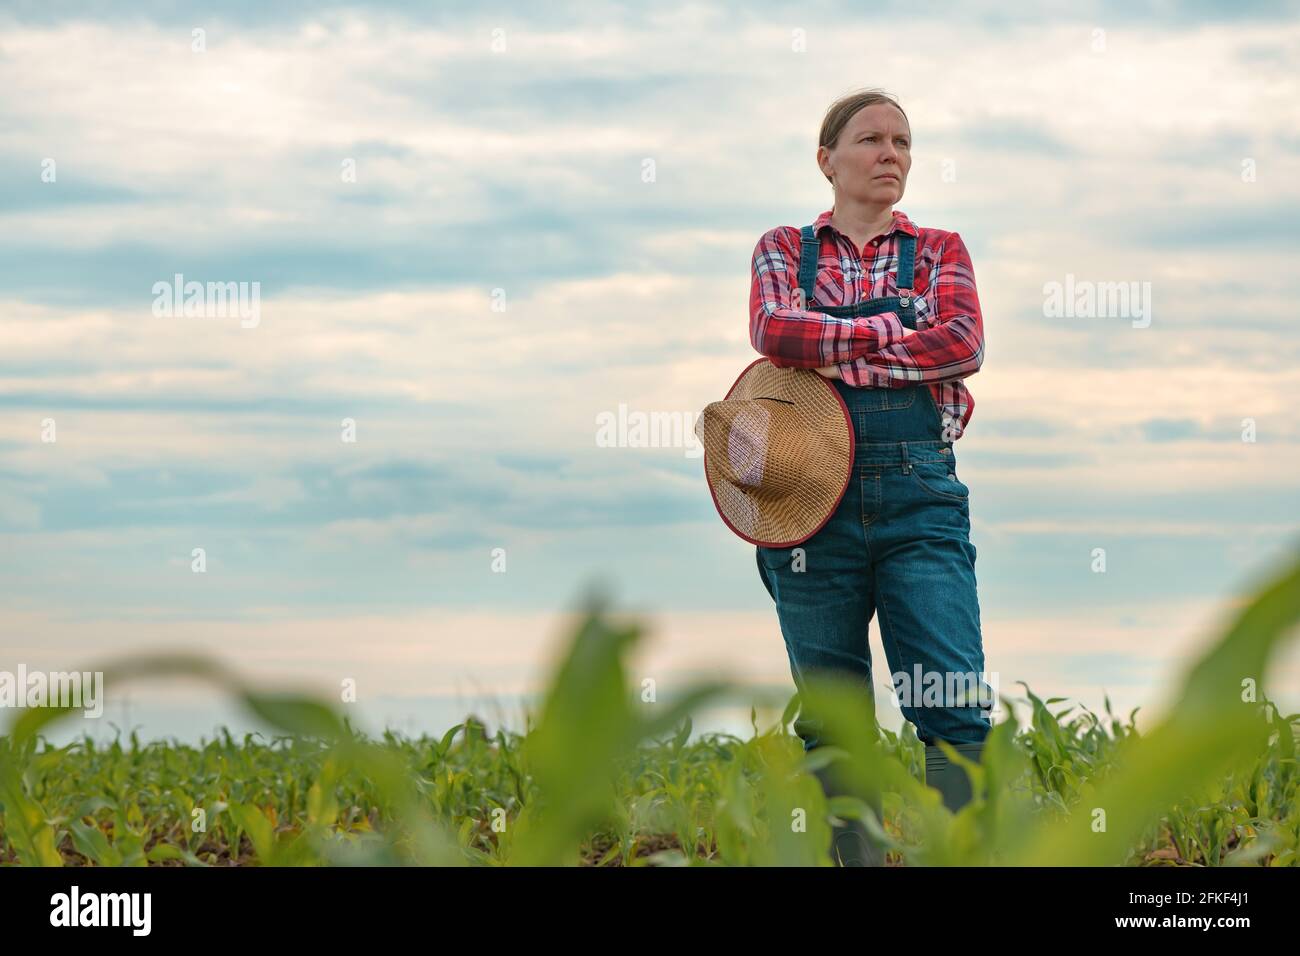 Concerned female agronomist standing in corn field and looking over young green maize crops Stock Photo